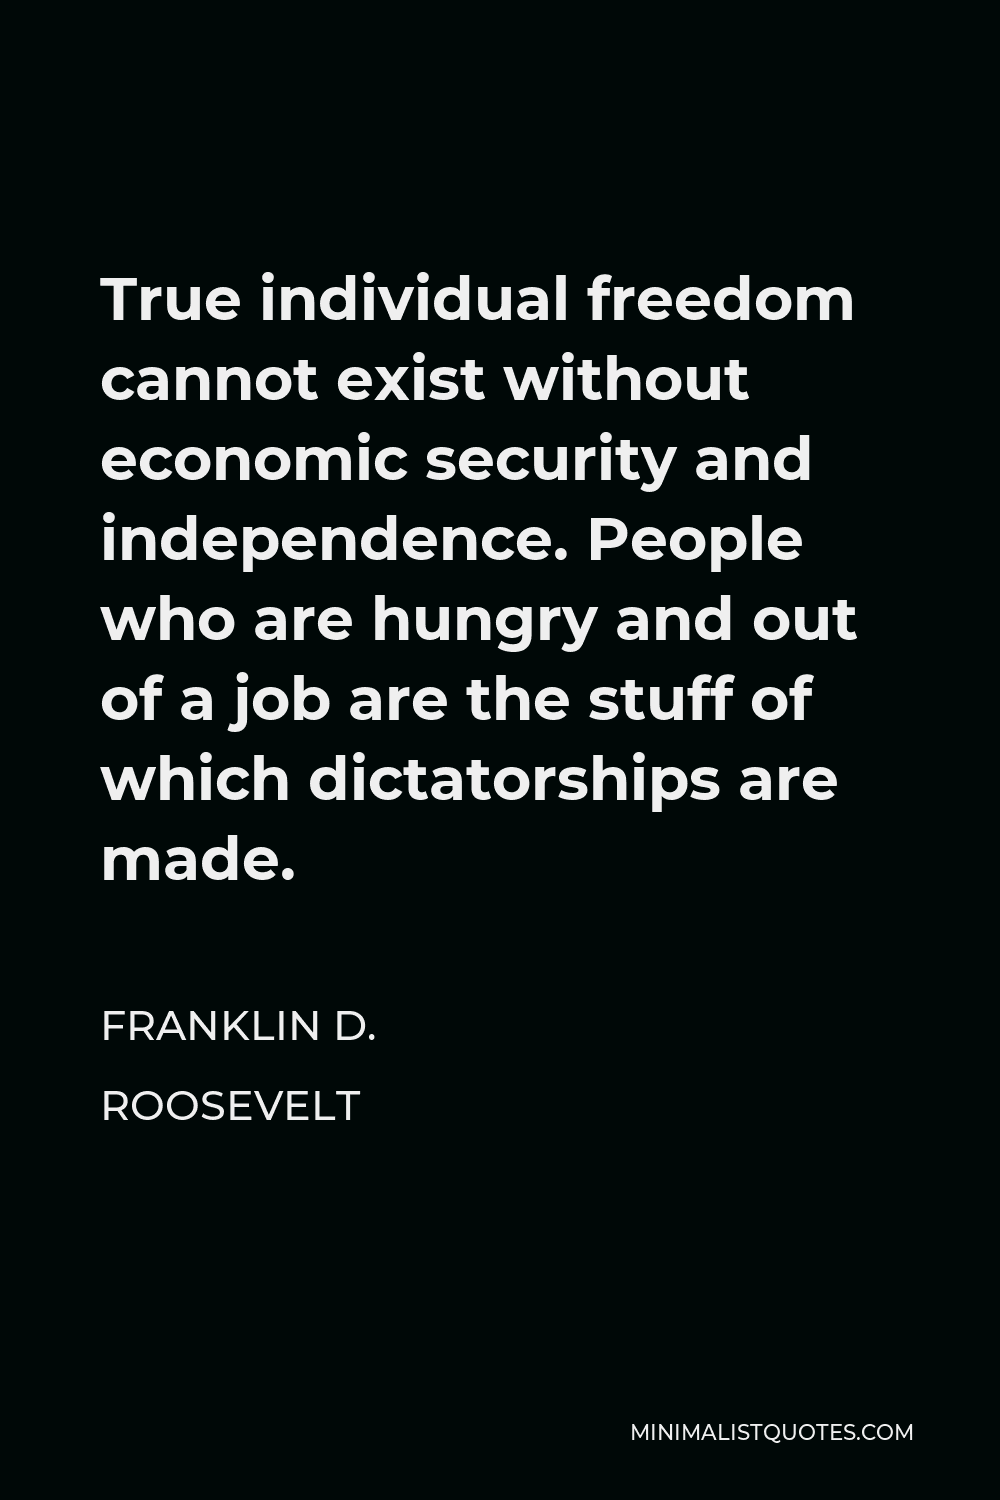 Franklin D. Roosevelt Quote - True individual freedom cannot exist without economic security and independence. People who are hungry and out of a job are the stuff of which dictatorships are made.